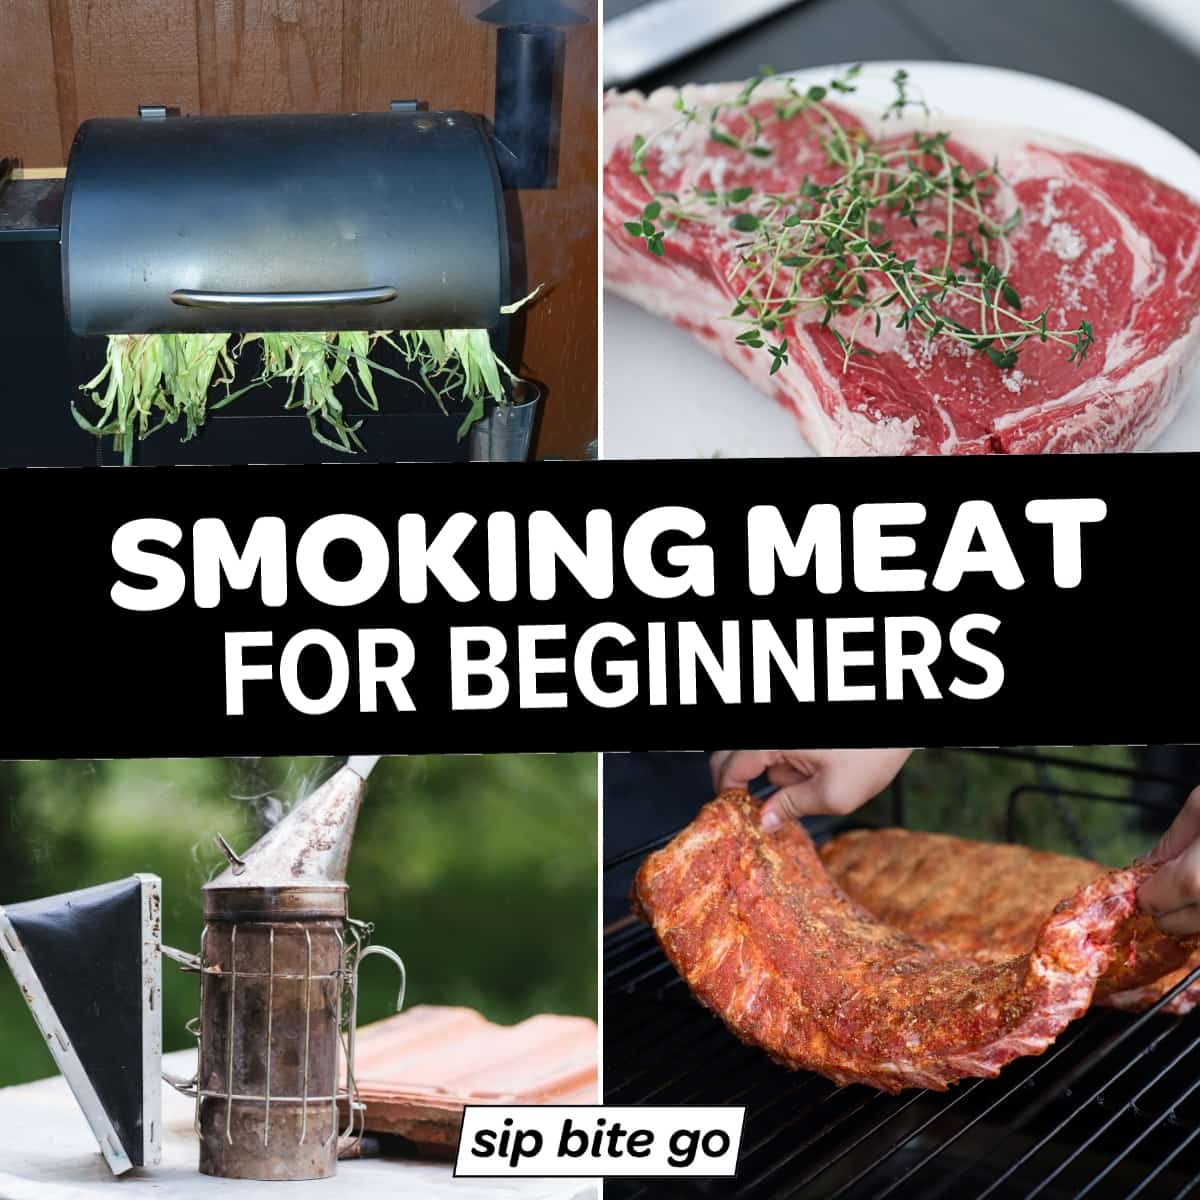 Smoking Meat For Beginners: How To Start Smoking Food At Home - Sip Bite Go